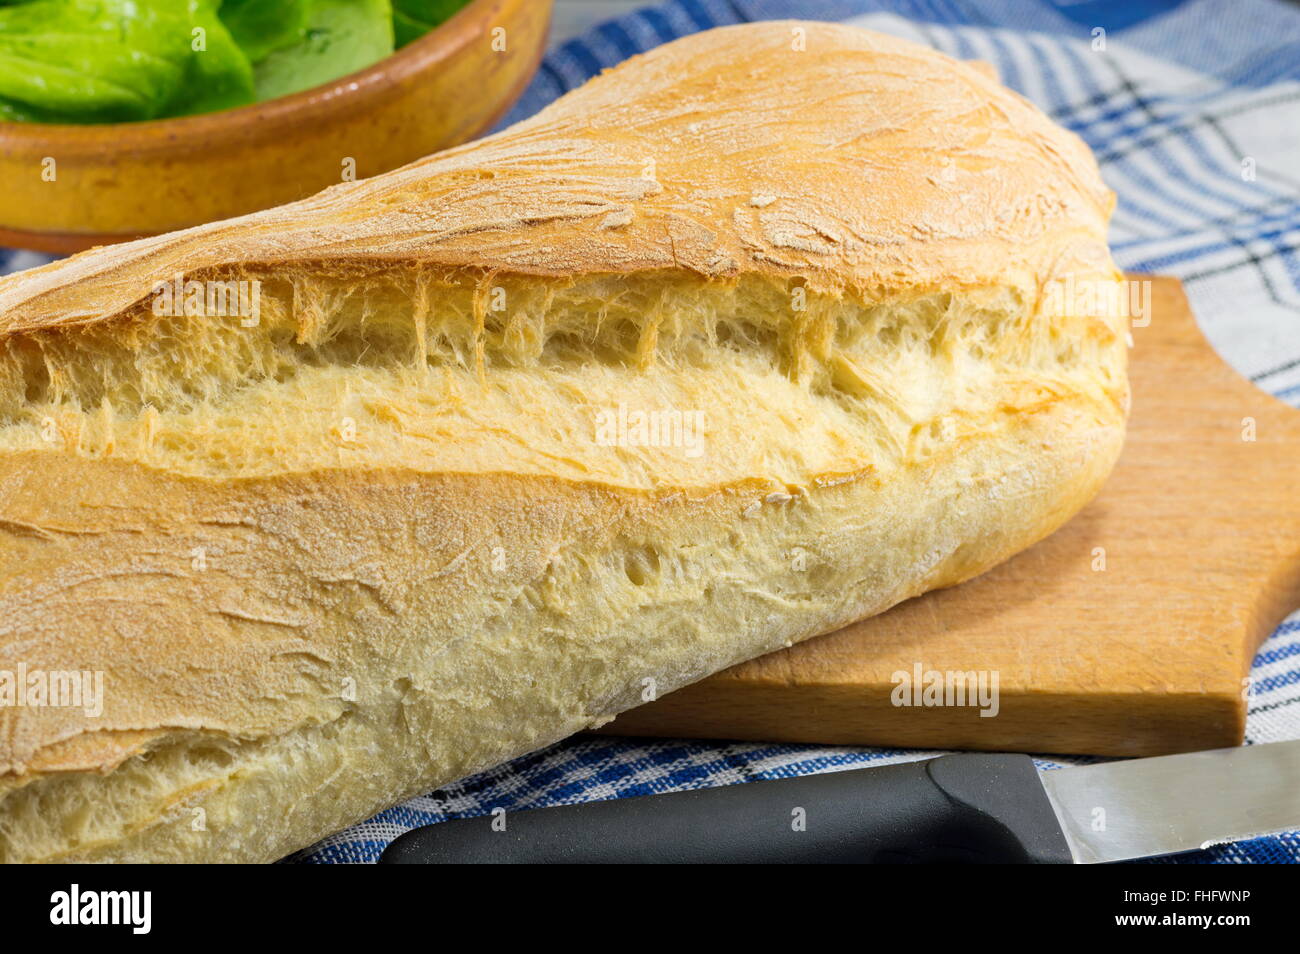 Home baked bread and a knife on the table Stock Photo